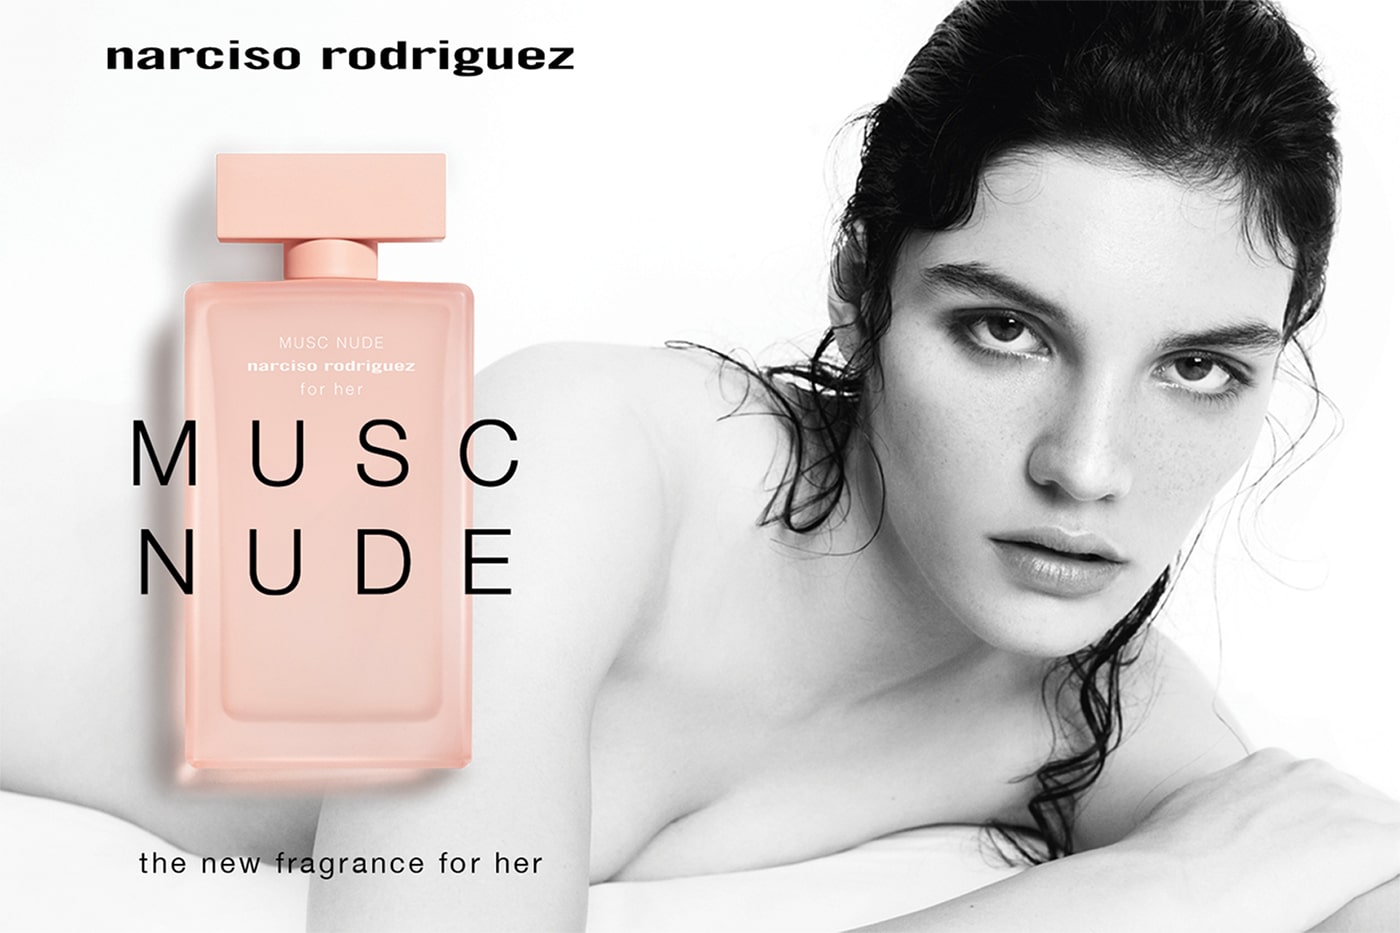 Narciso Rodriguez Musc Nude